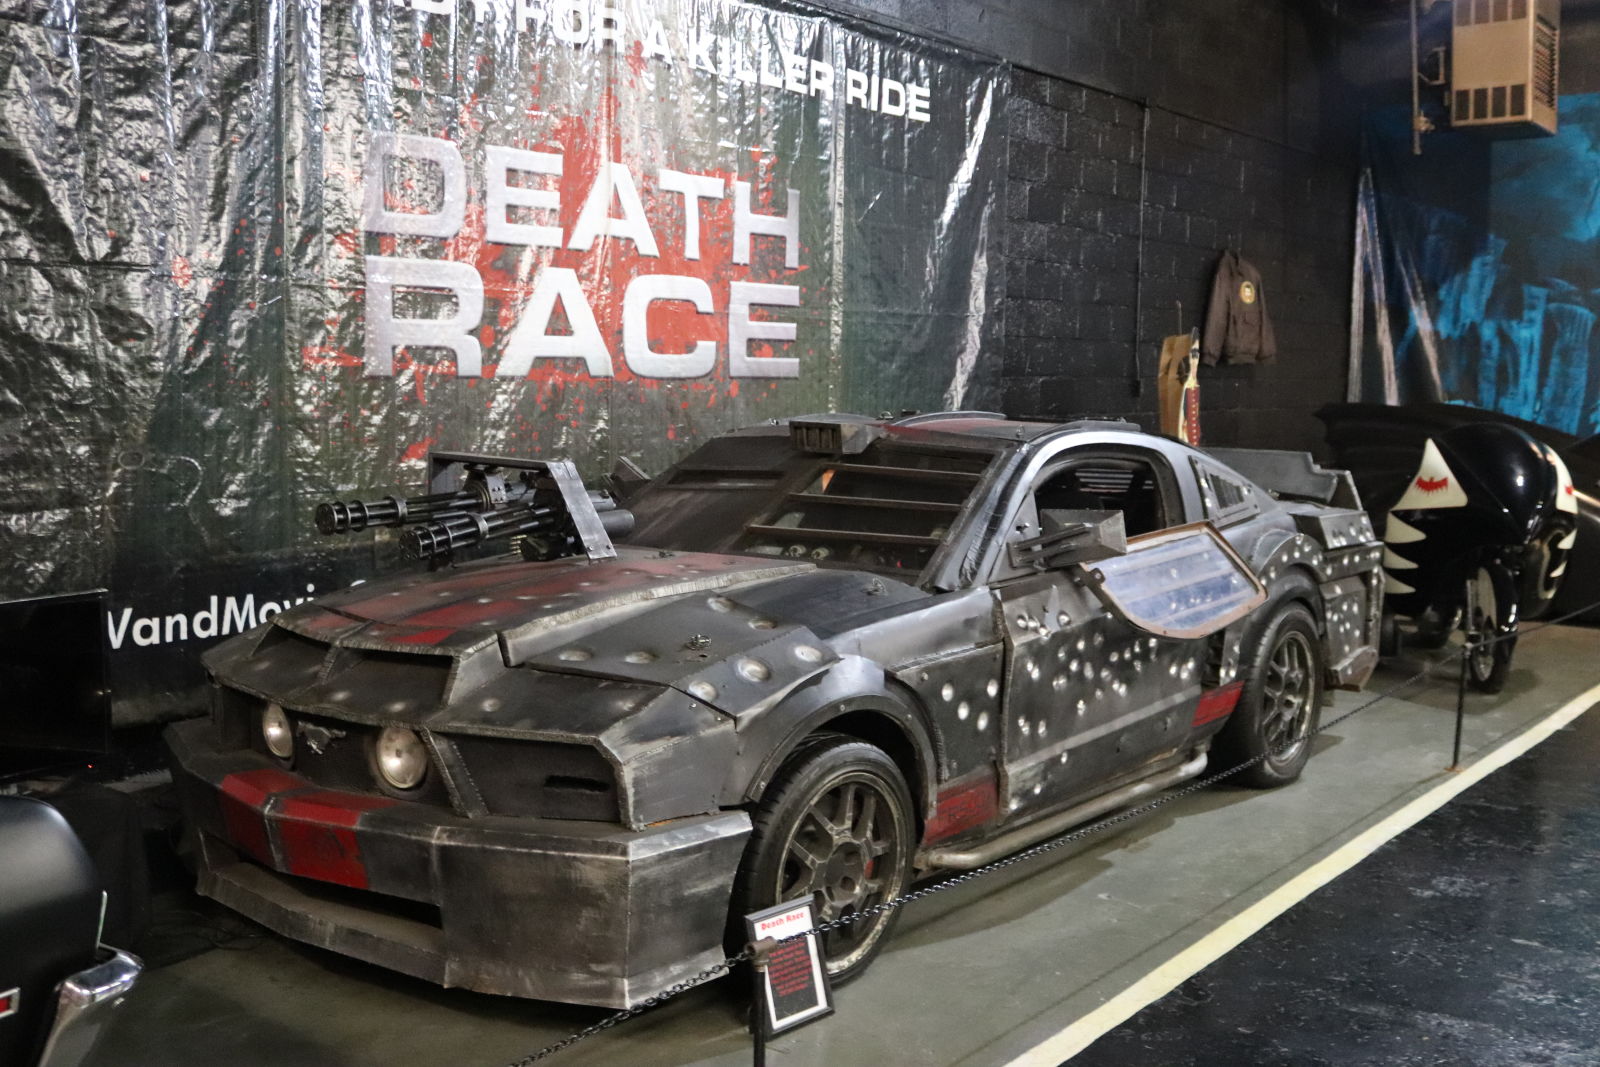 Death Race car. in fron of this was the Chevy Nova from Quintin Tarantino’s ‘Death Proof’. Unfortunately a lot of pictures from here turned out like garbage. some other cars worth mentioning are a 89 Batmobile, Blues Brothers car, and KIT from Knight Rider.